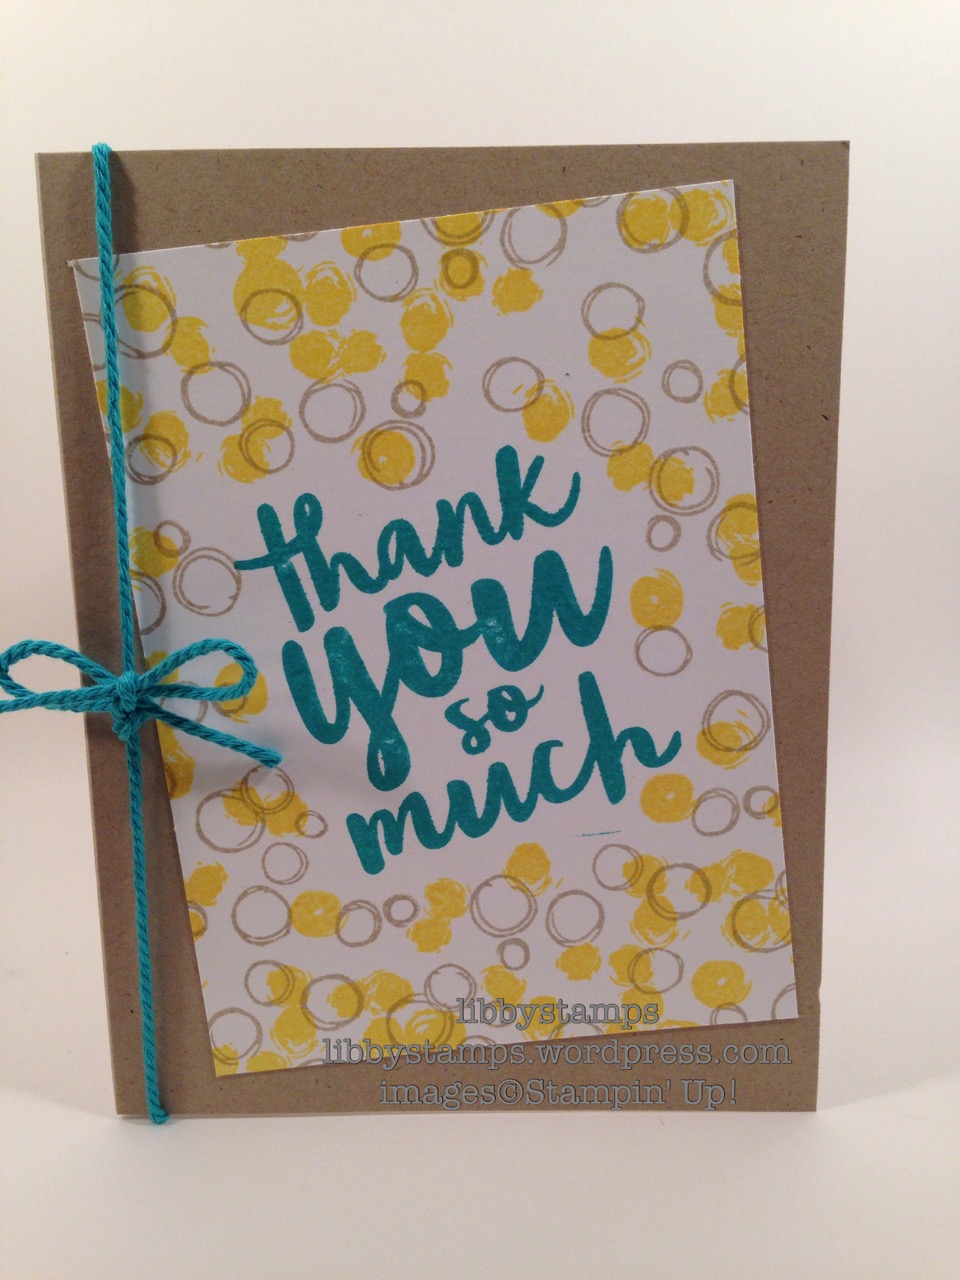 libbystamps, stampin up, Playful Backgrounds, Thankful Thoughts, CCMC410, Thank You